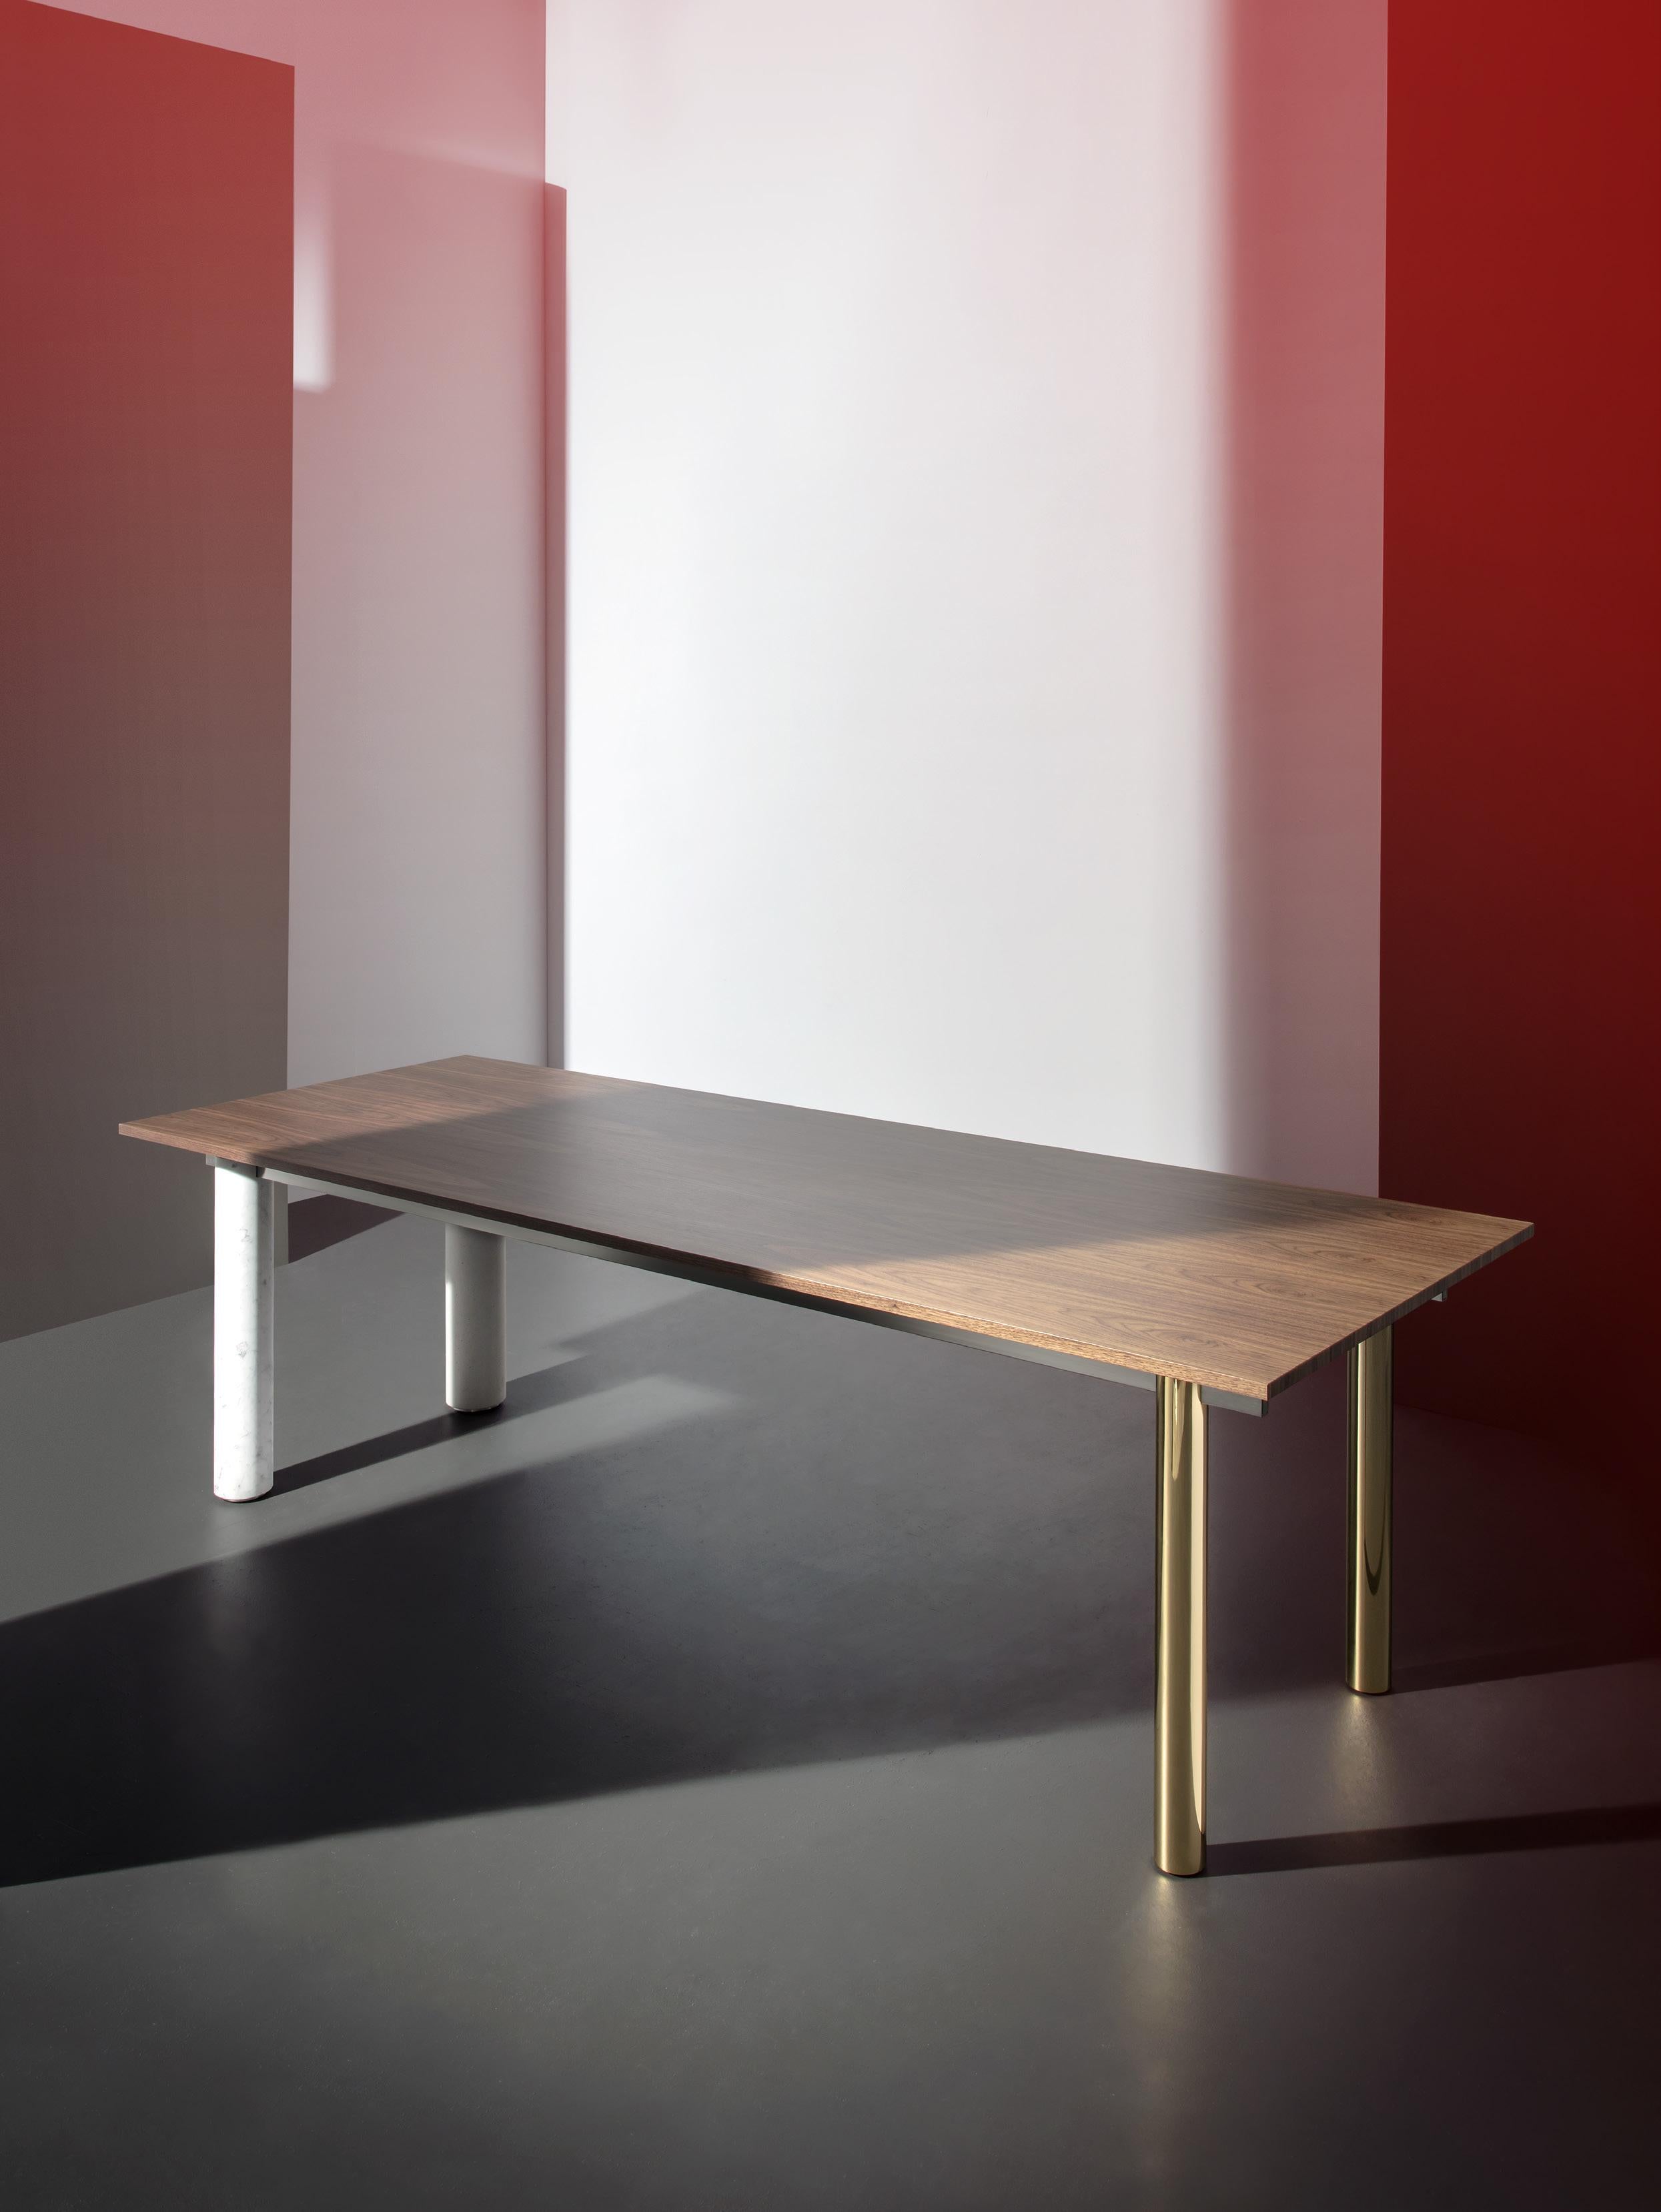 Quattro Gambe is a contemporary table system with its focus on materials. It is a combination of wood, metal, and mineral, customizable at will. The top and the legs can be in walnut, lacquered walnut, marble, metal, or even concrete. This makes